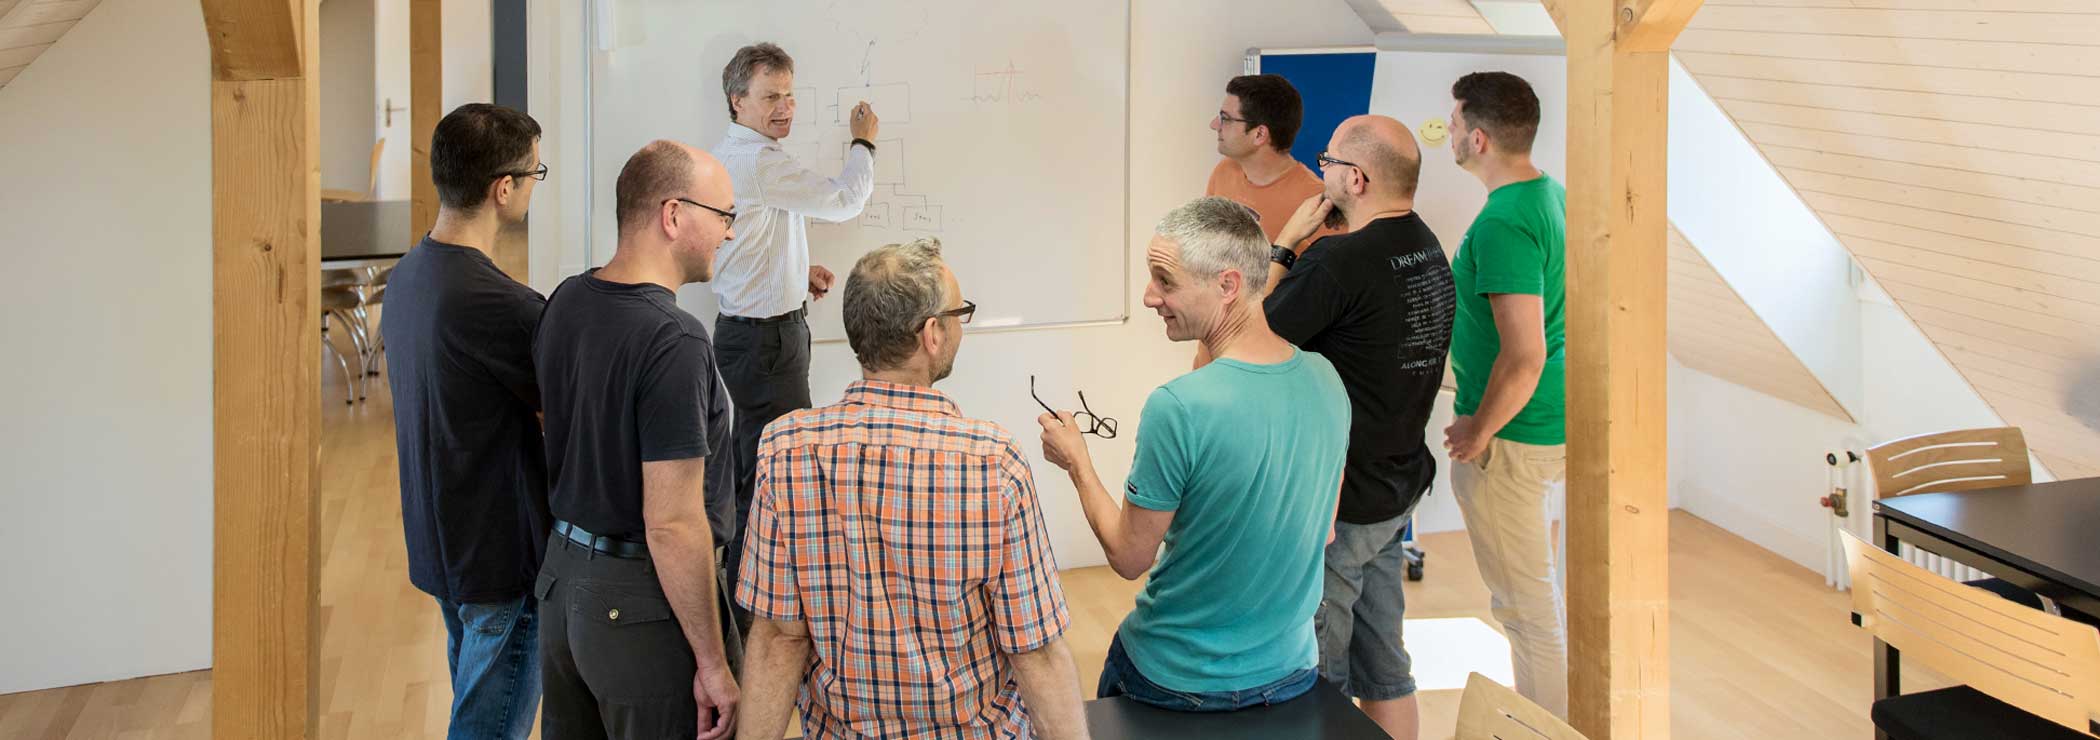 Consulting: workshop at the whiteboard